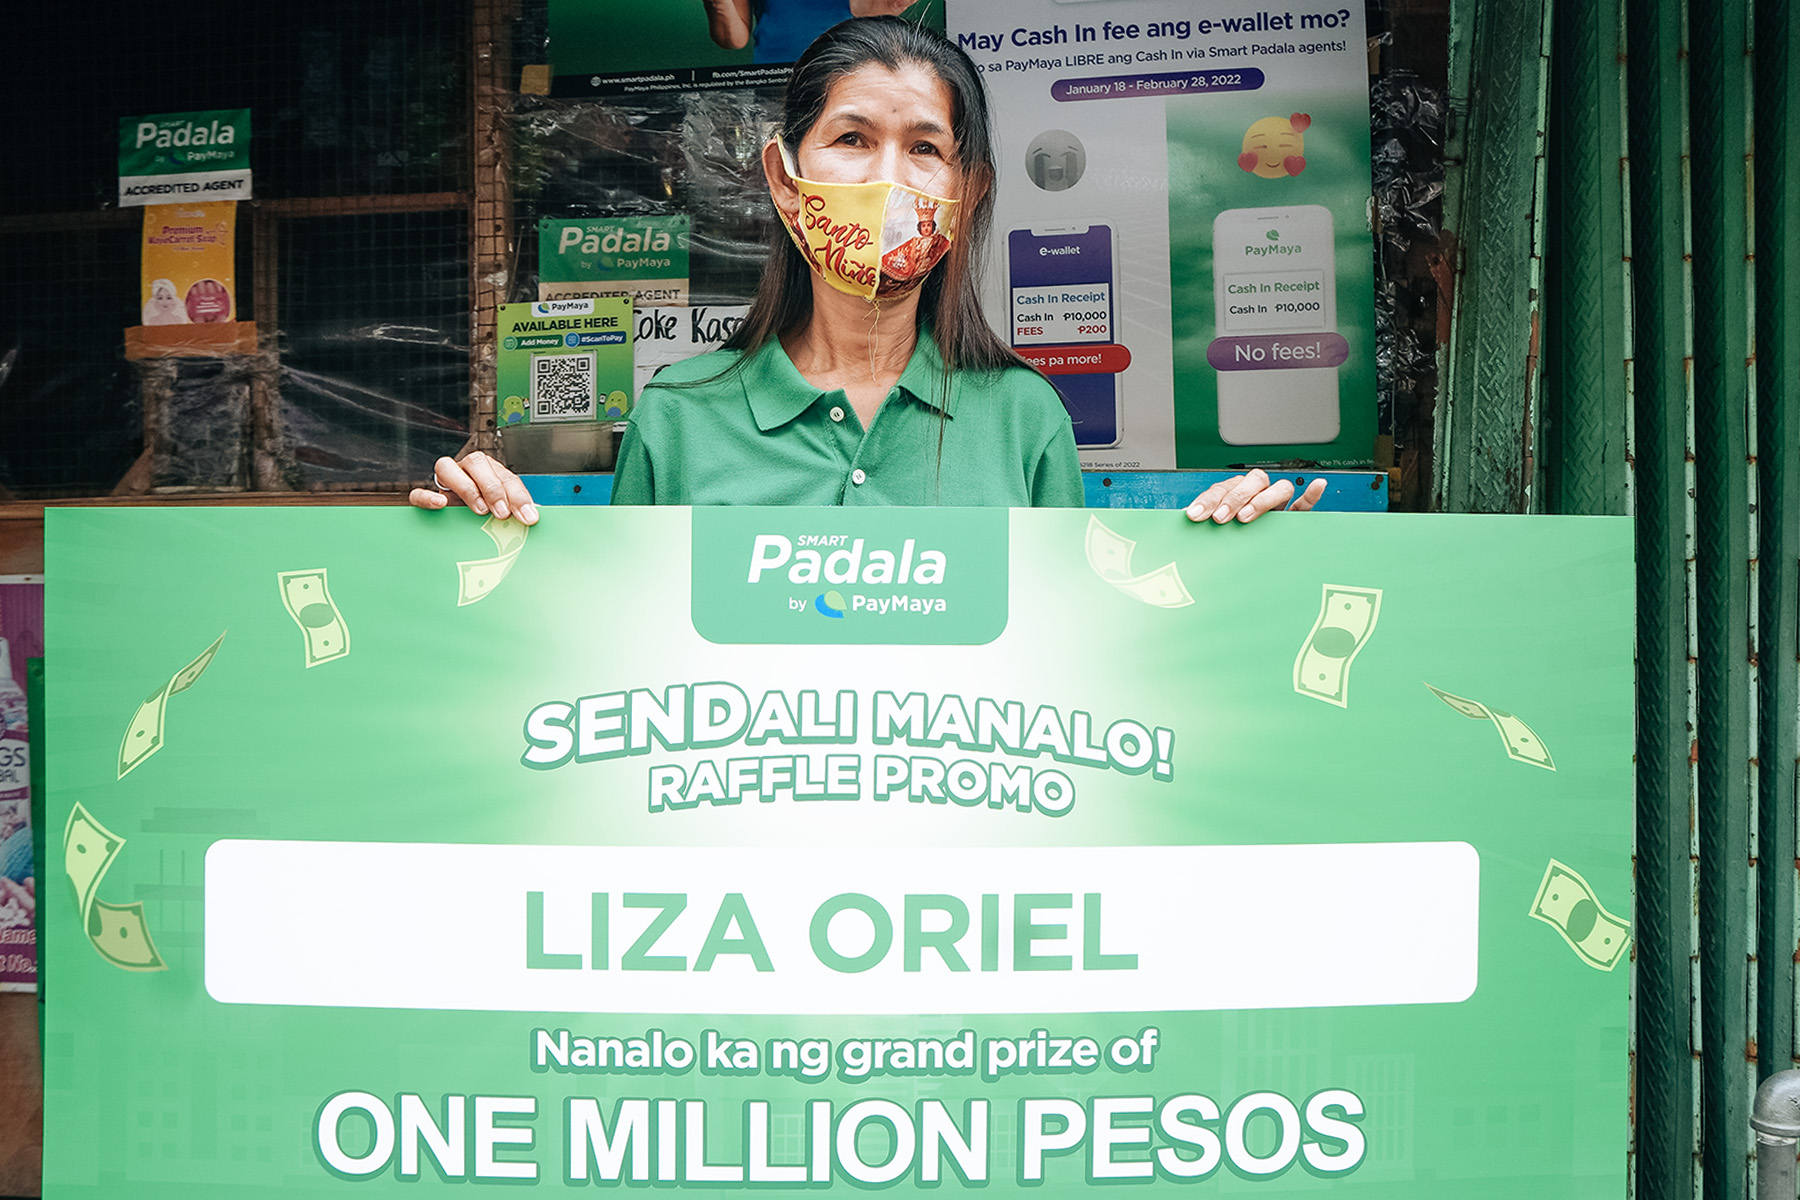 Lucky Smart Padala customers took home more than P3 million worth of prizes from the SENDali Manalo Raffle Promo